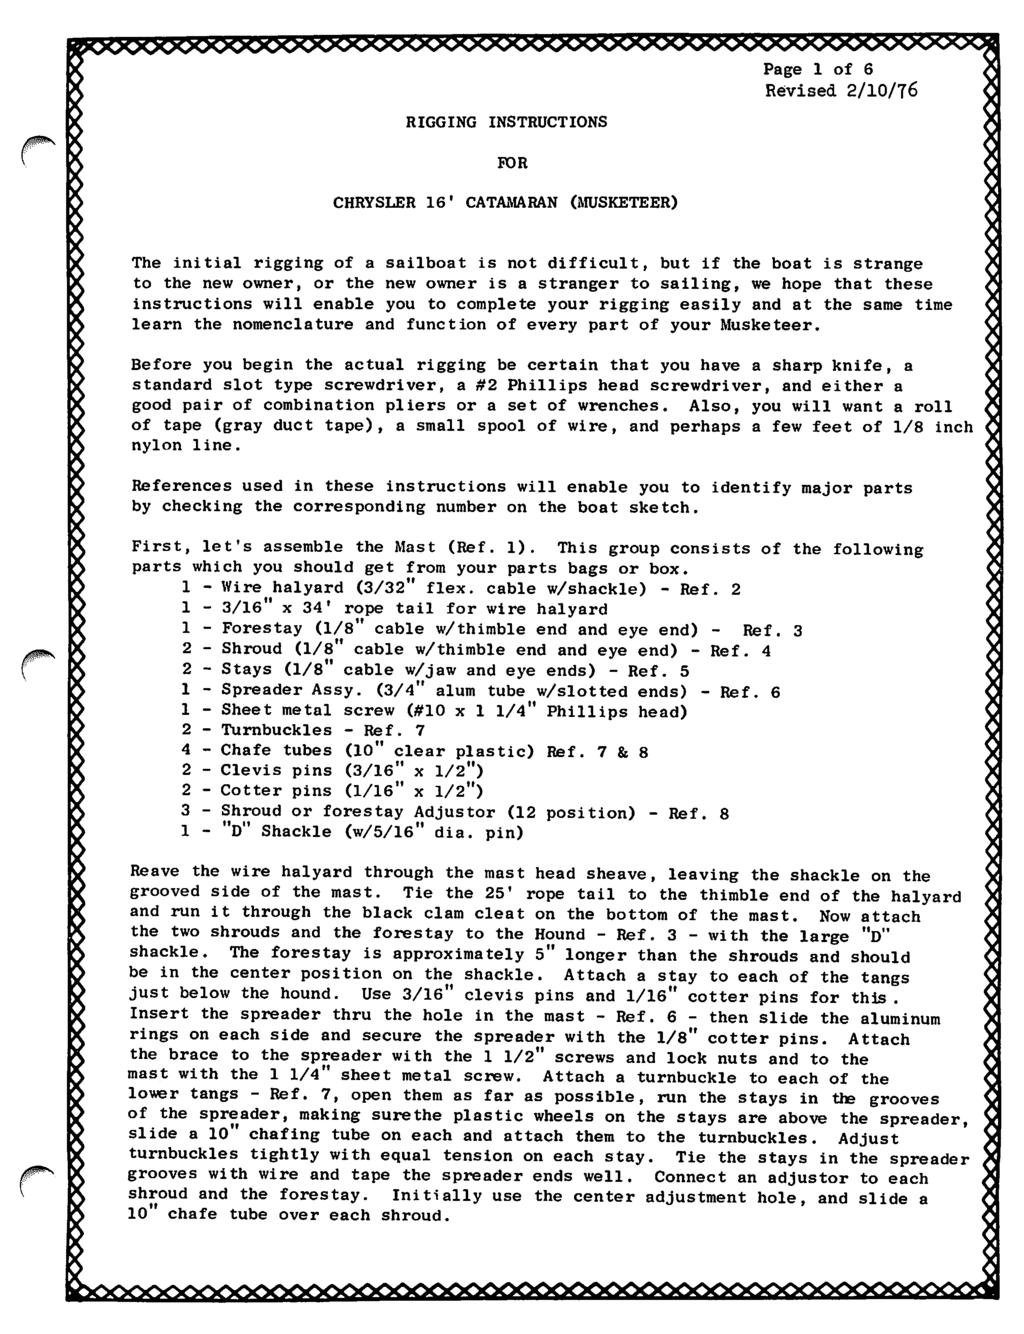 Page of 6 Revised 2/0/76 RIGGING INSTRUCTIONS FDR CHRYSLER 6' CATAMARAN (MUSKETEER) The initial rigging of a sailboat is not difficult, but if the boat is strange to the new owner, or the new owner